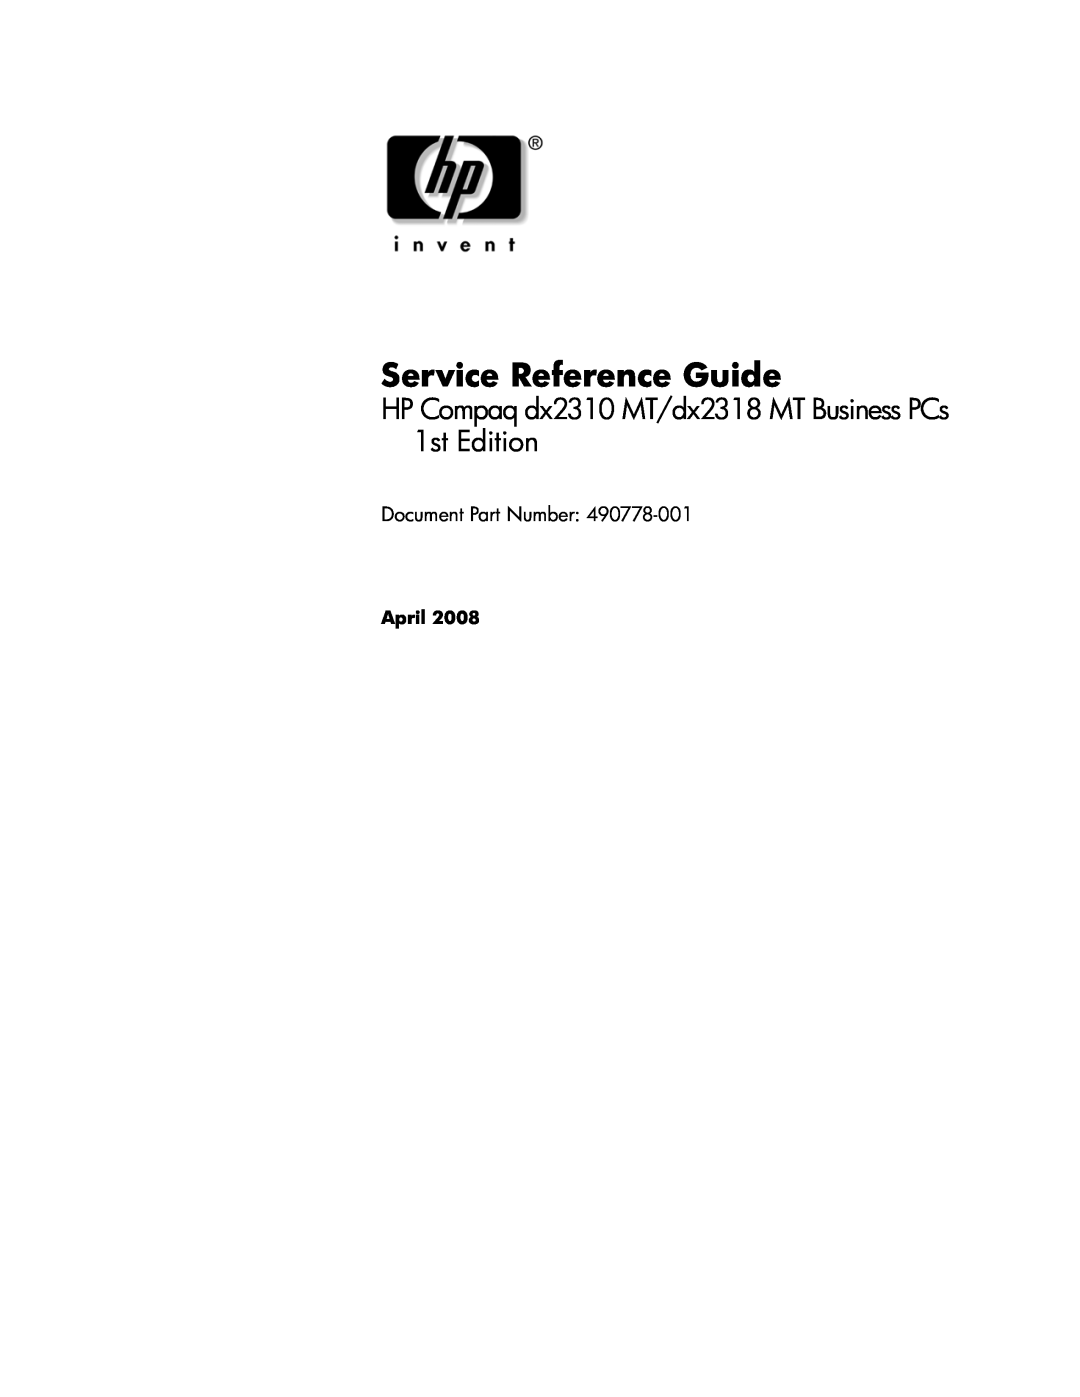 HP manual Service Reference Guide, HP Compaq dx2310 MT/dx2318 MT Business PCs 1st Edition, Document Part Number 